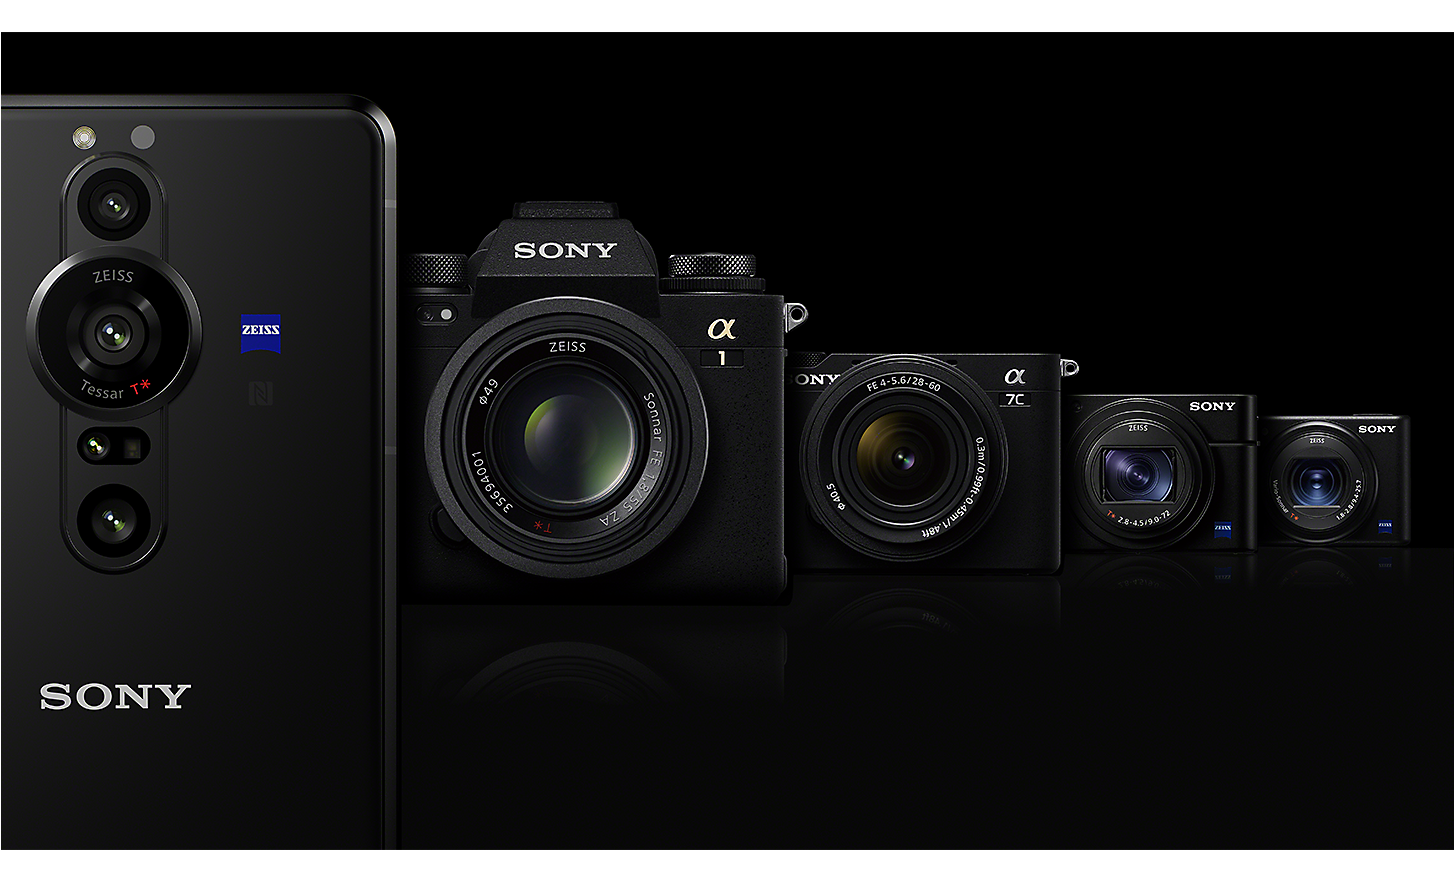 The Xperia PRO-I alongside four other models in the Sony camera line-up